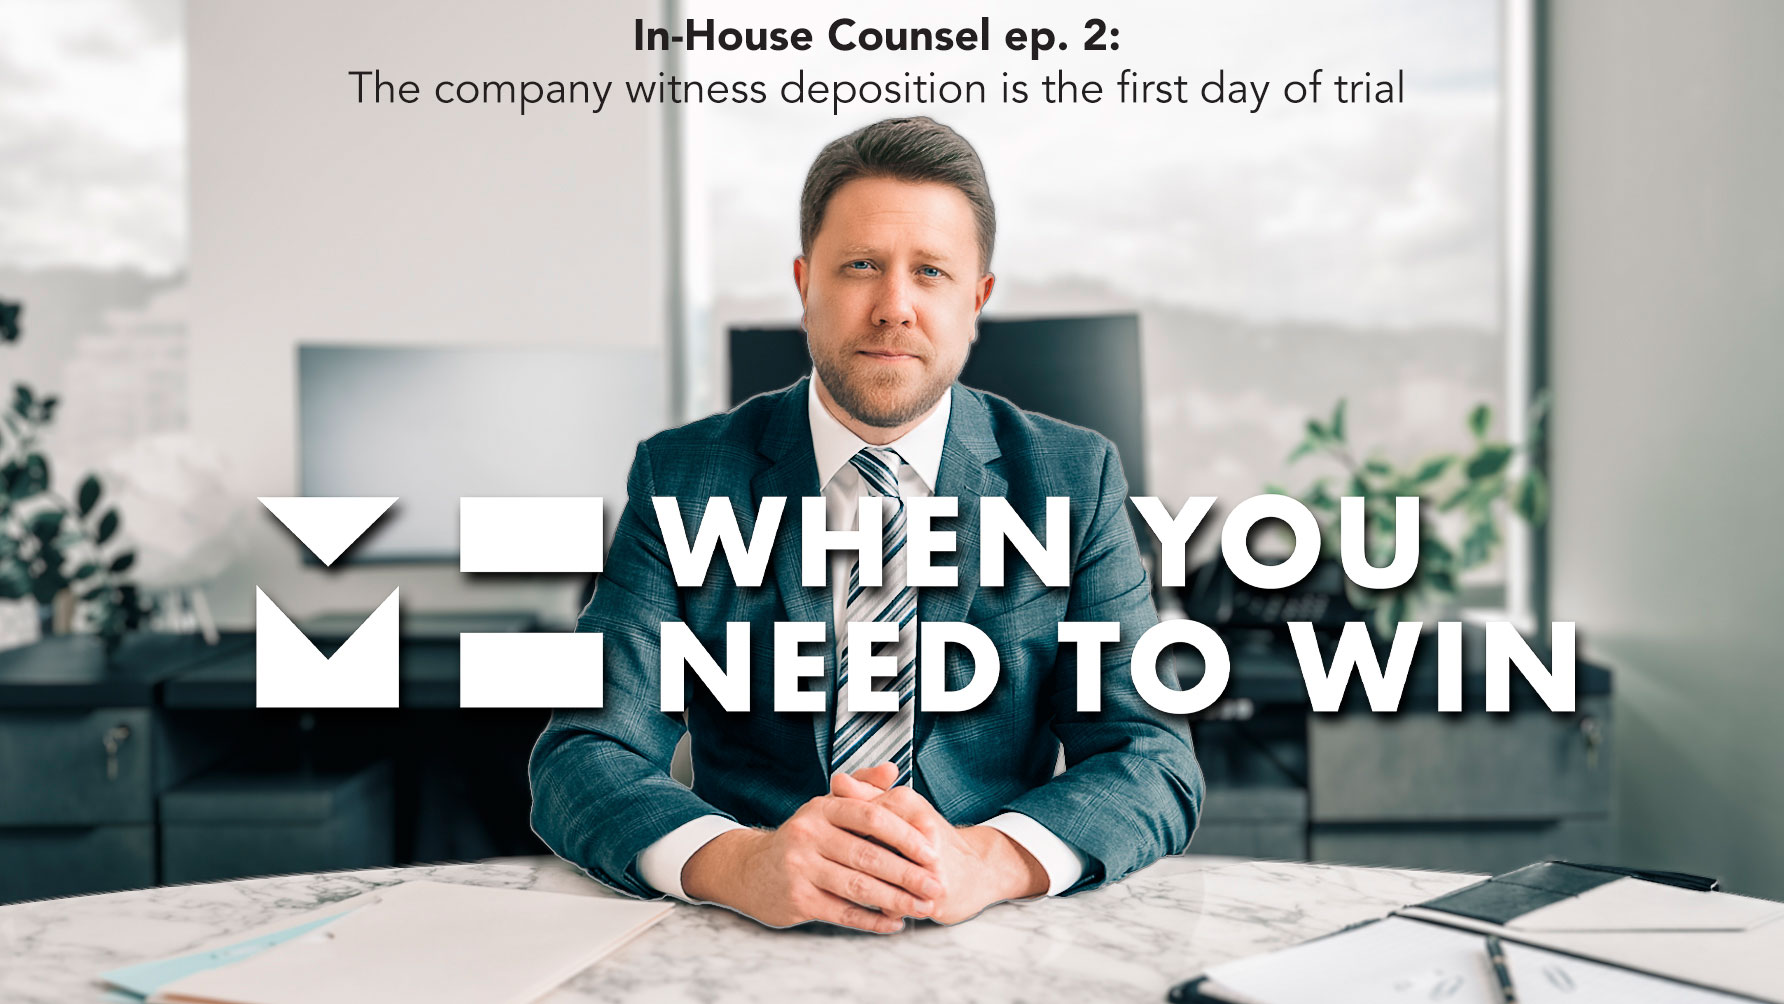 When You Need to Win - In-house Counsel Edition - The company witness deposition is the first day of trial